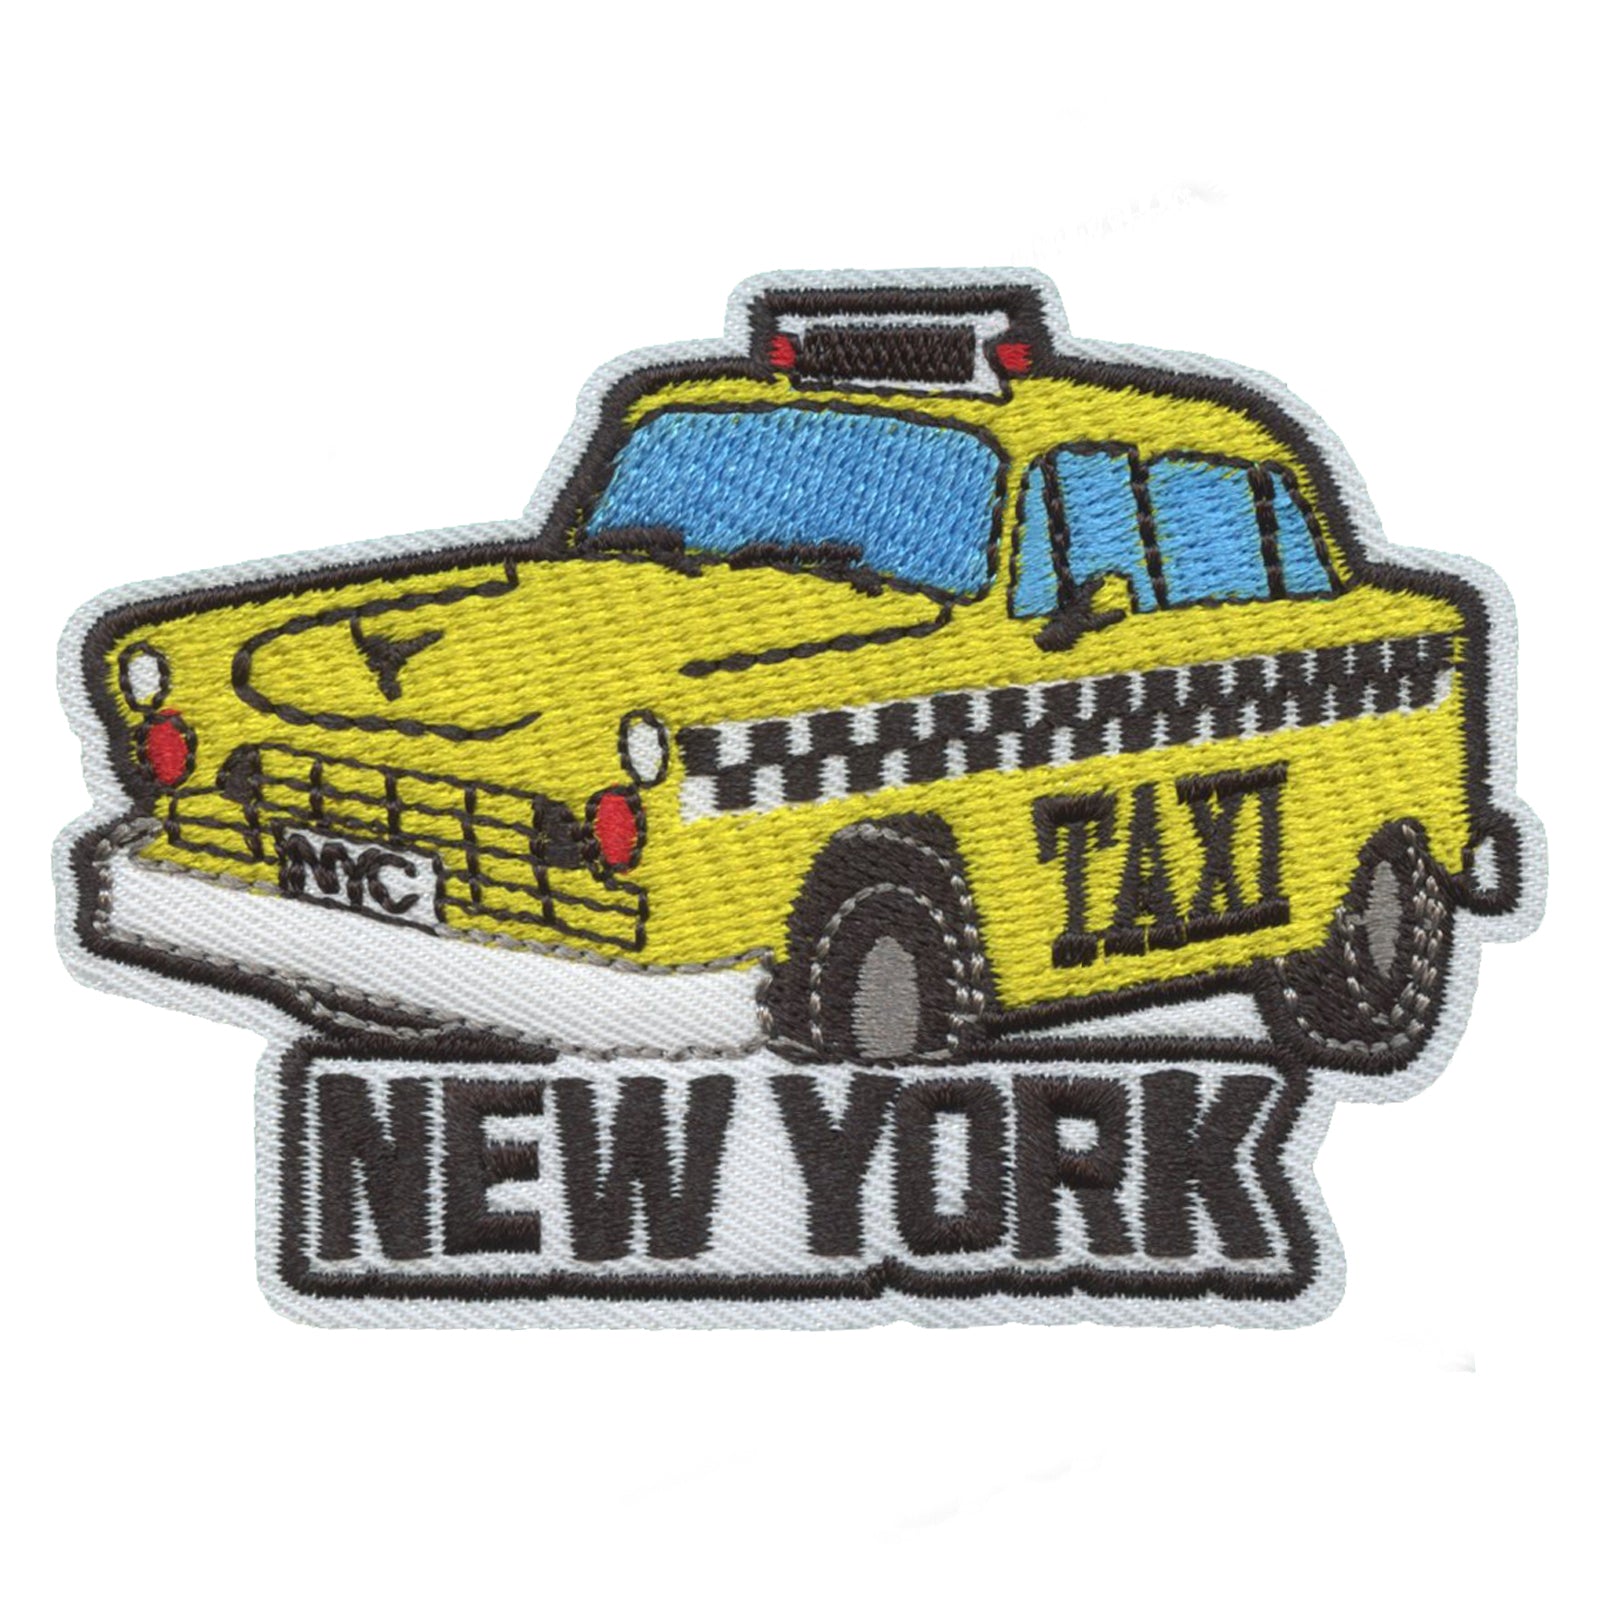 New York Taxi Die Cut Embroidered Iron on Patch 